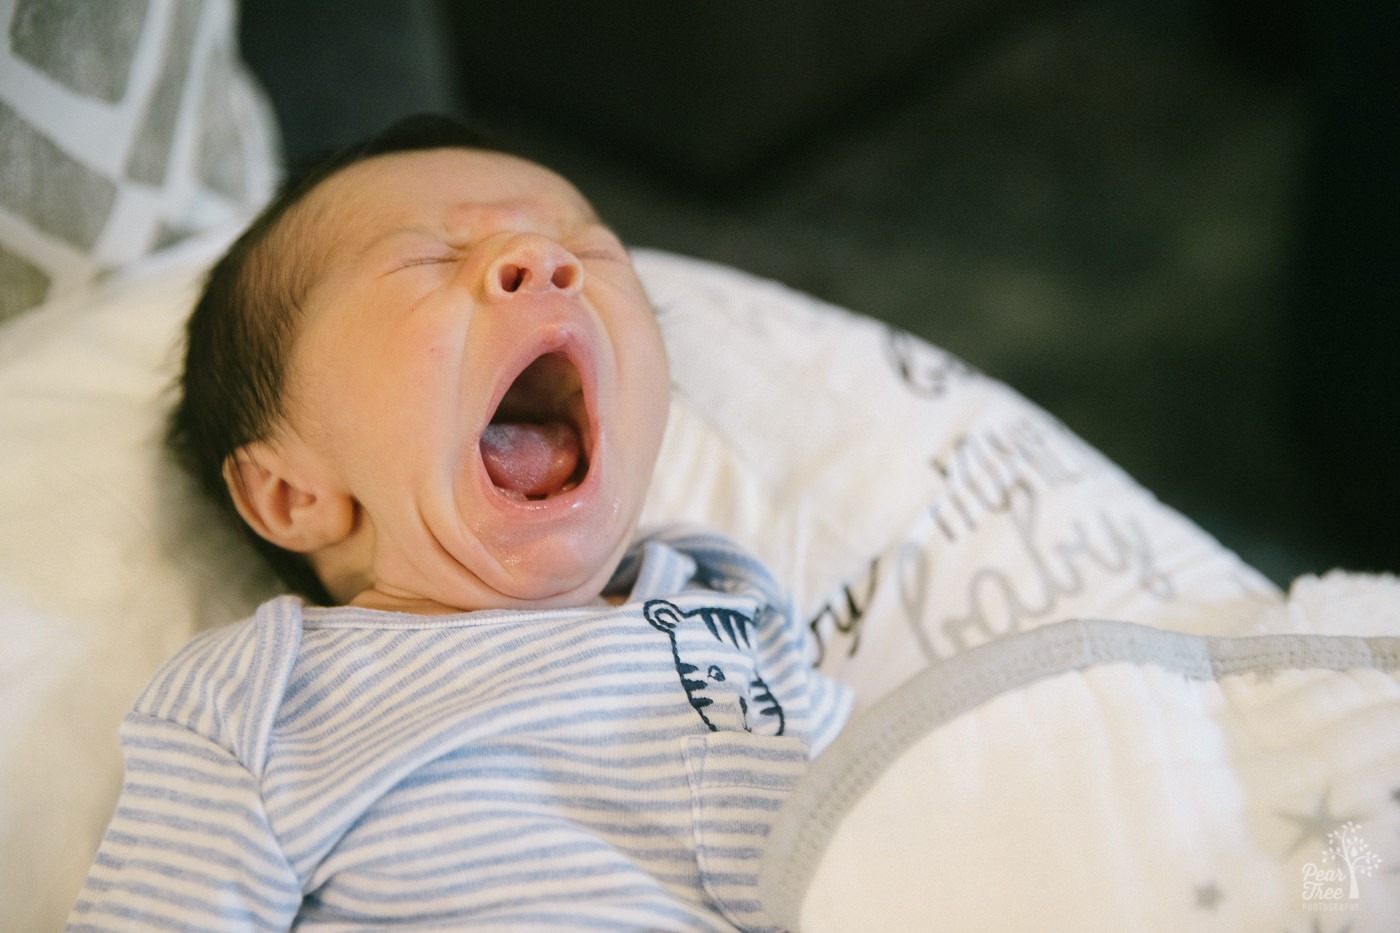 Five day old yawning big in his zebra onesie.